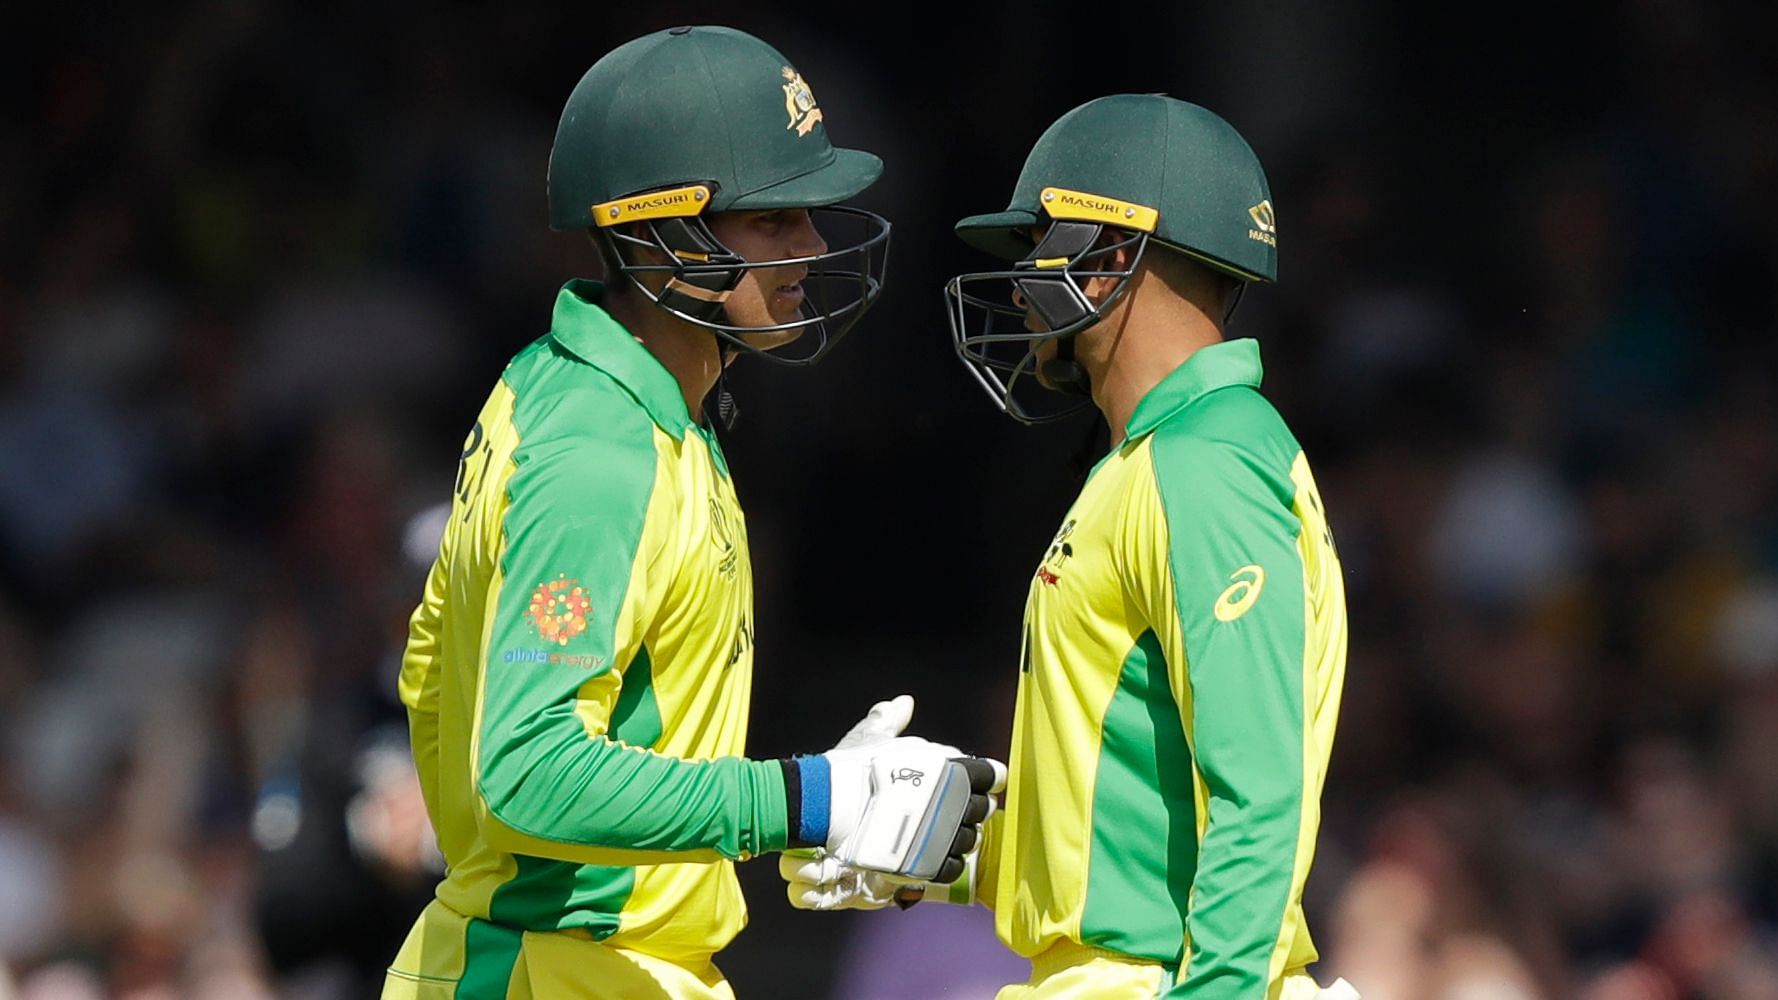 Usman Khawaja made 88 and Alex Carey 71 in a fightback worth 107 for the sixth wicket.